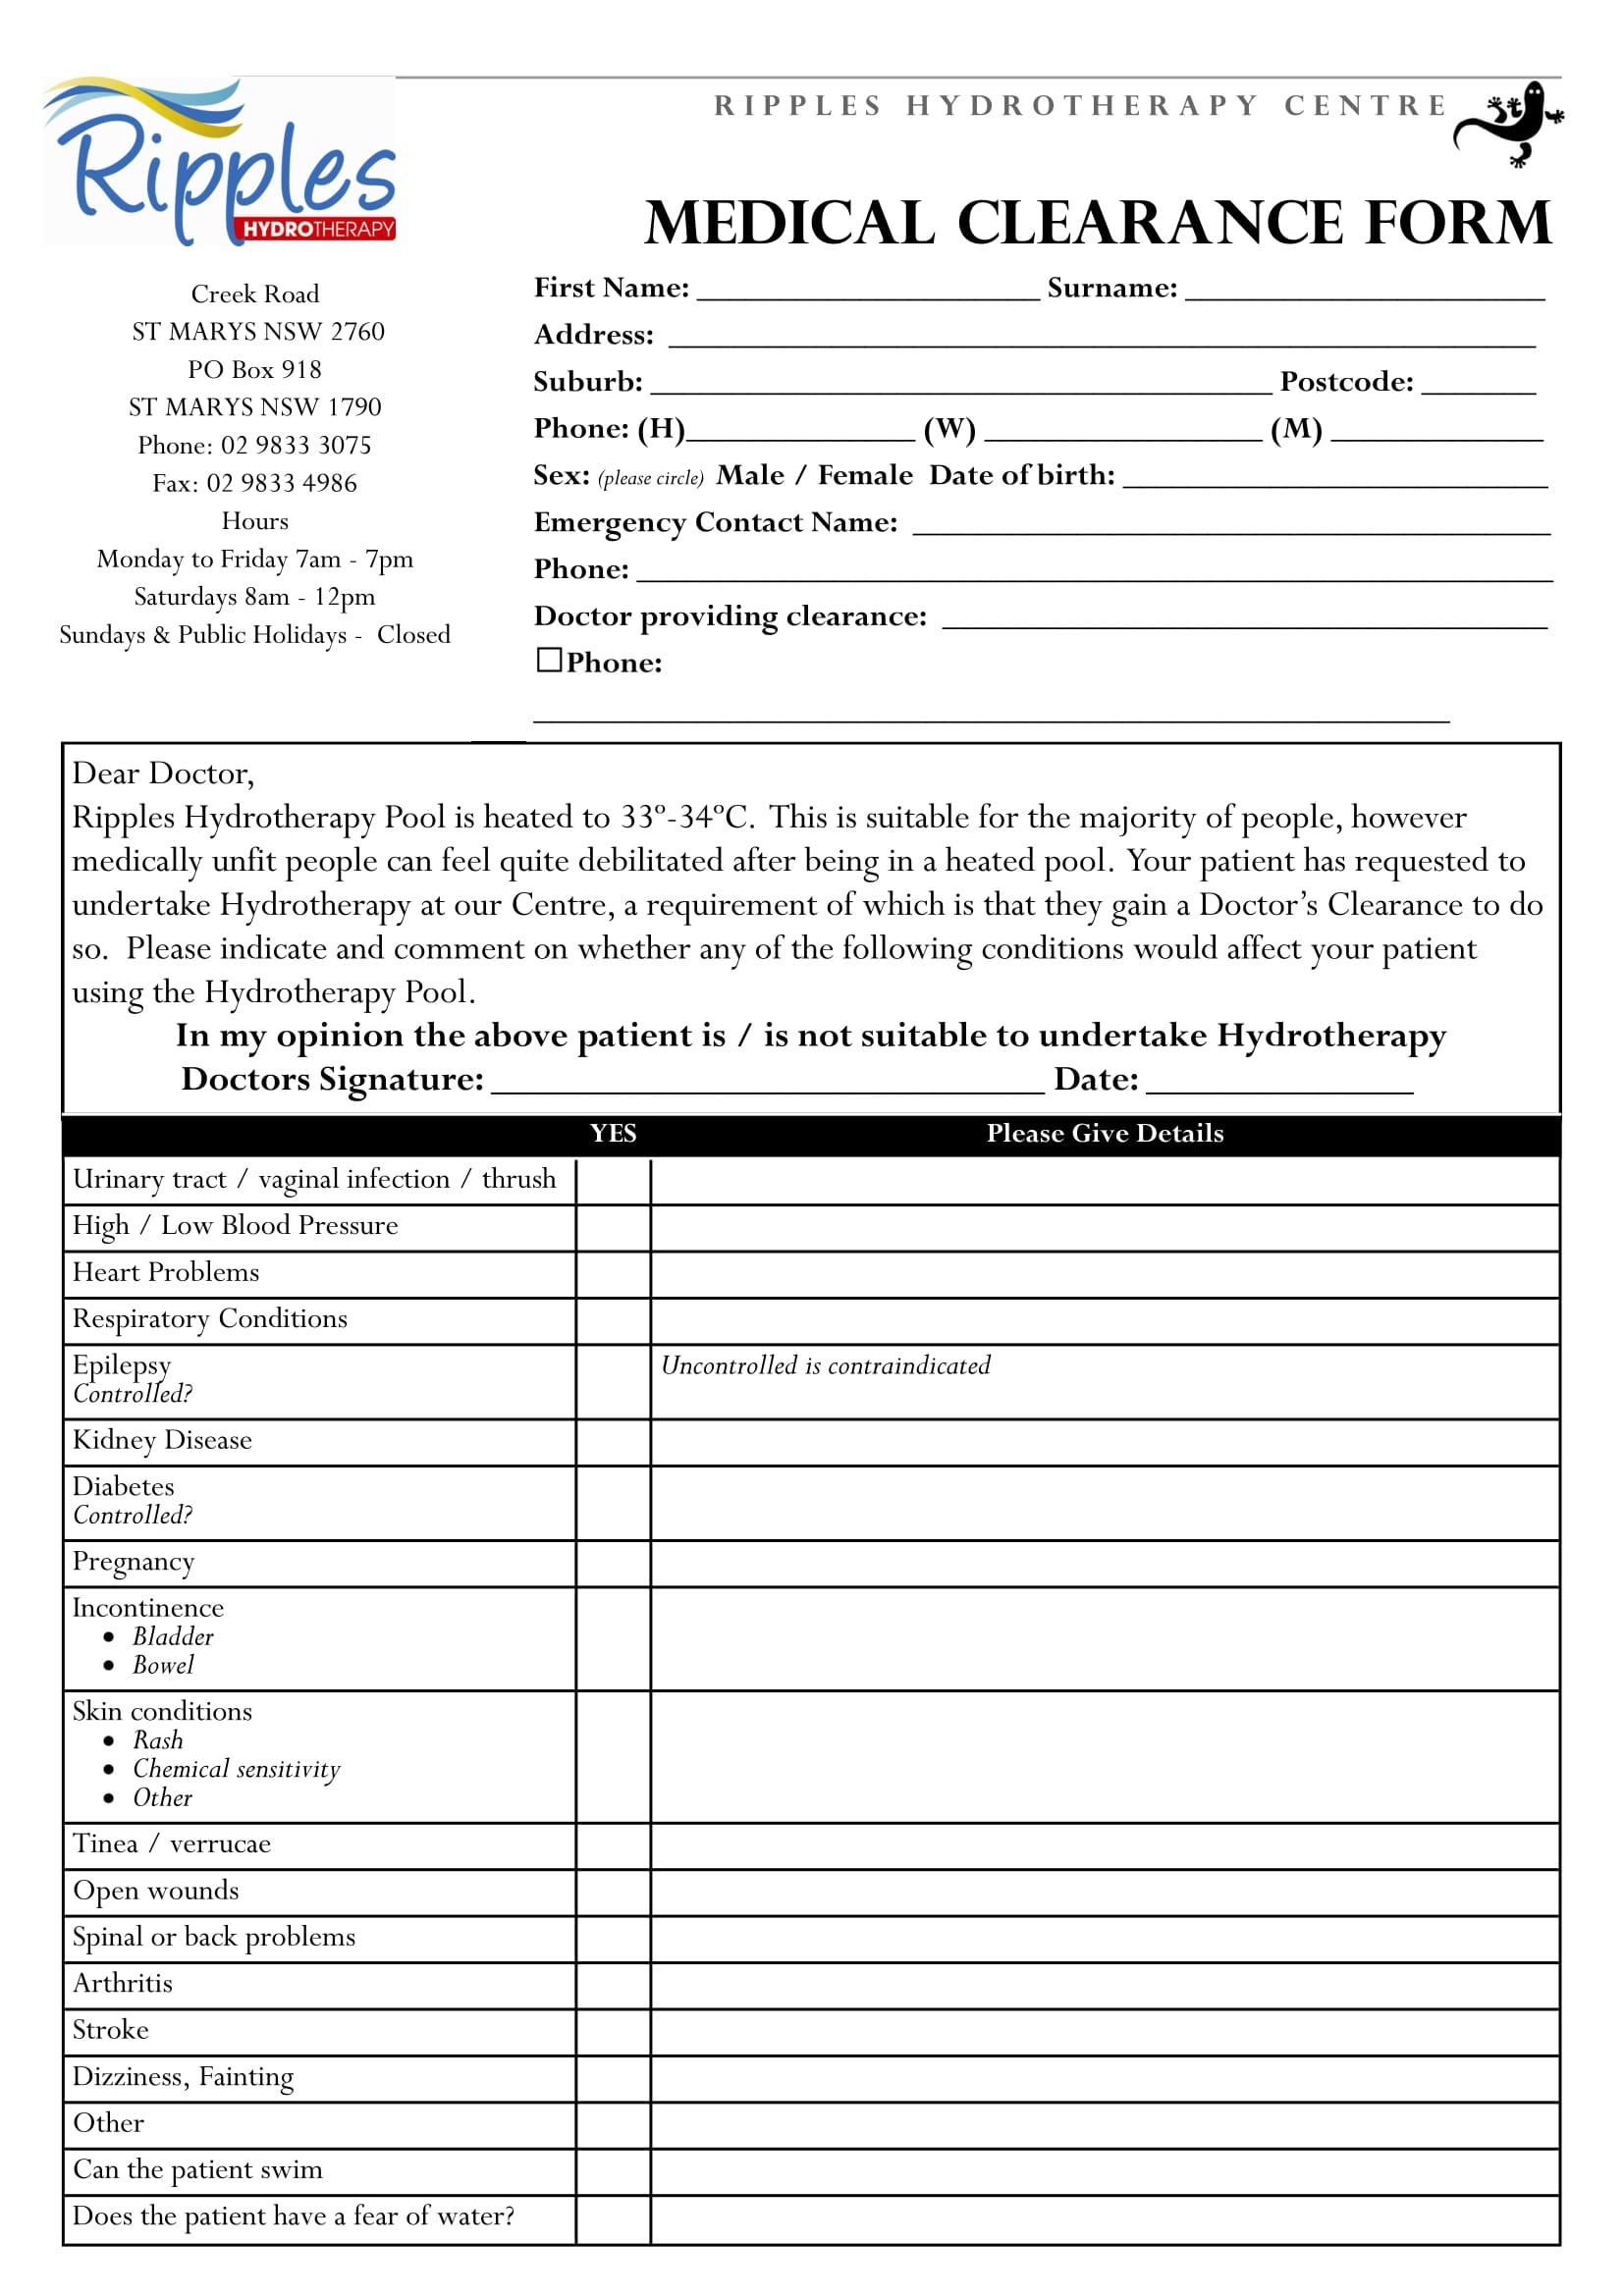 hydrotherapy medical clearance form 1